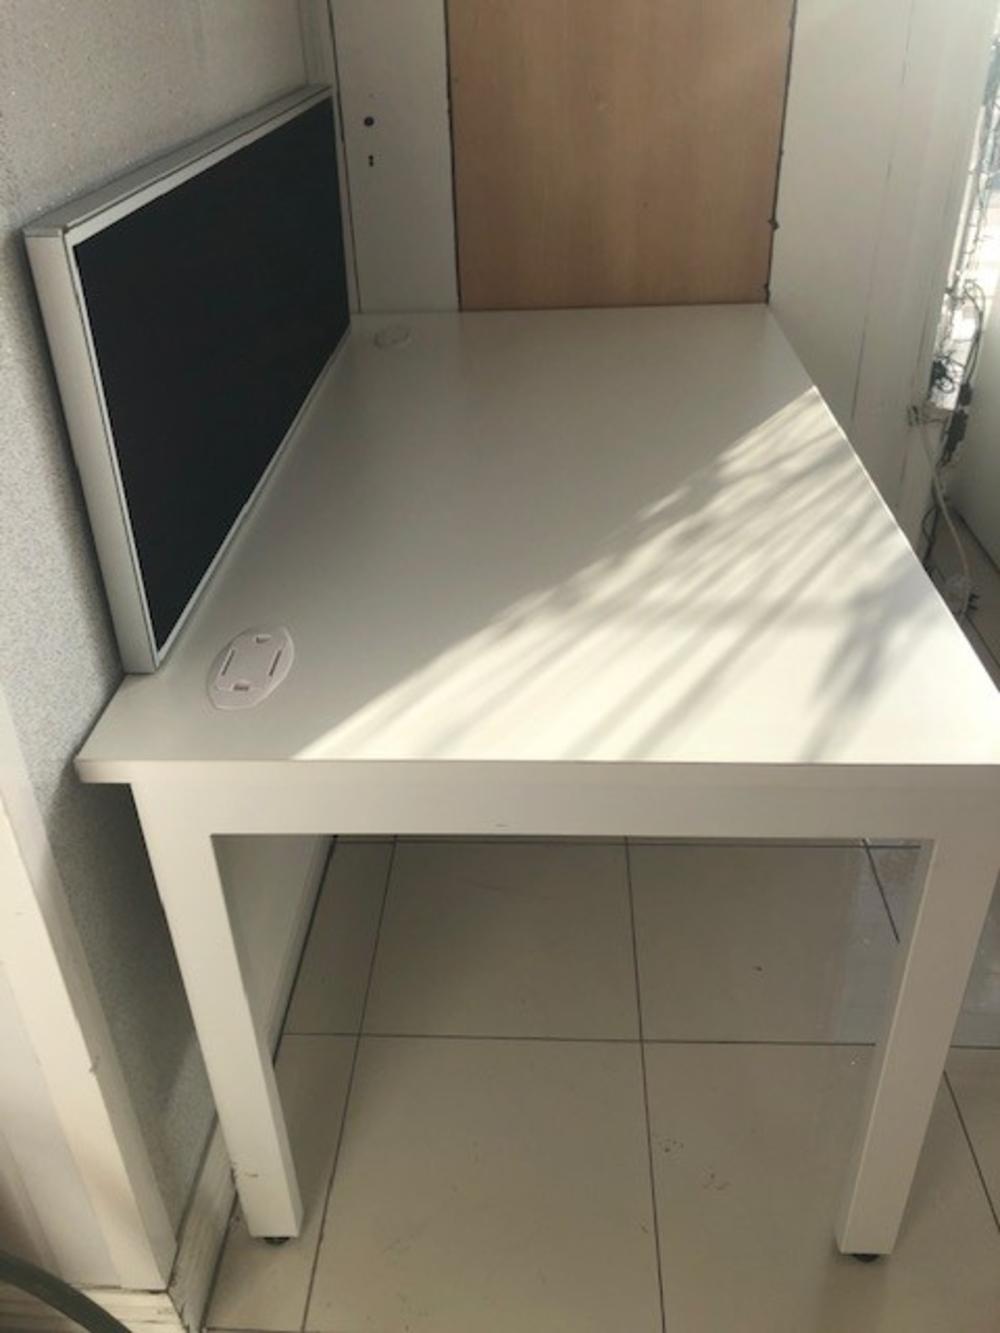 New Ex Display White 1400mm Bench Desk with Black Screen (Should be £265+vat)